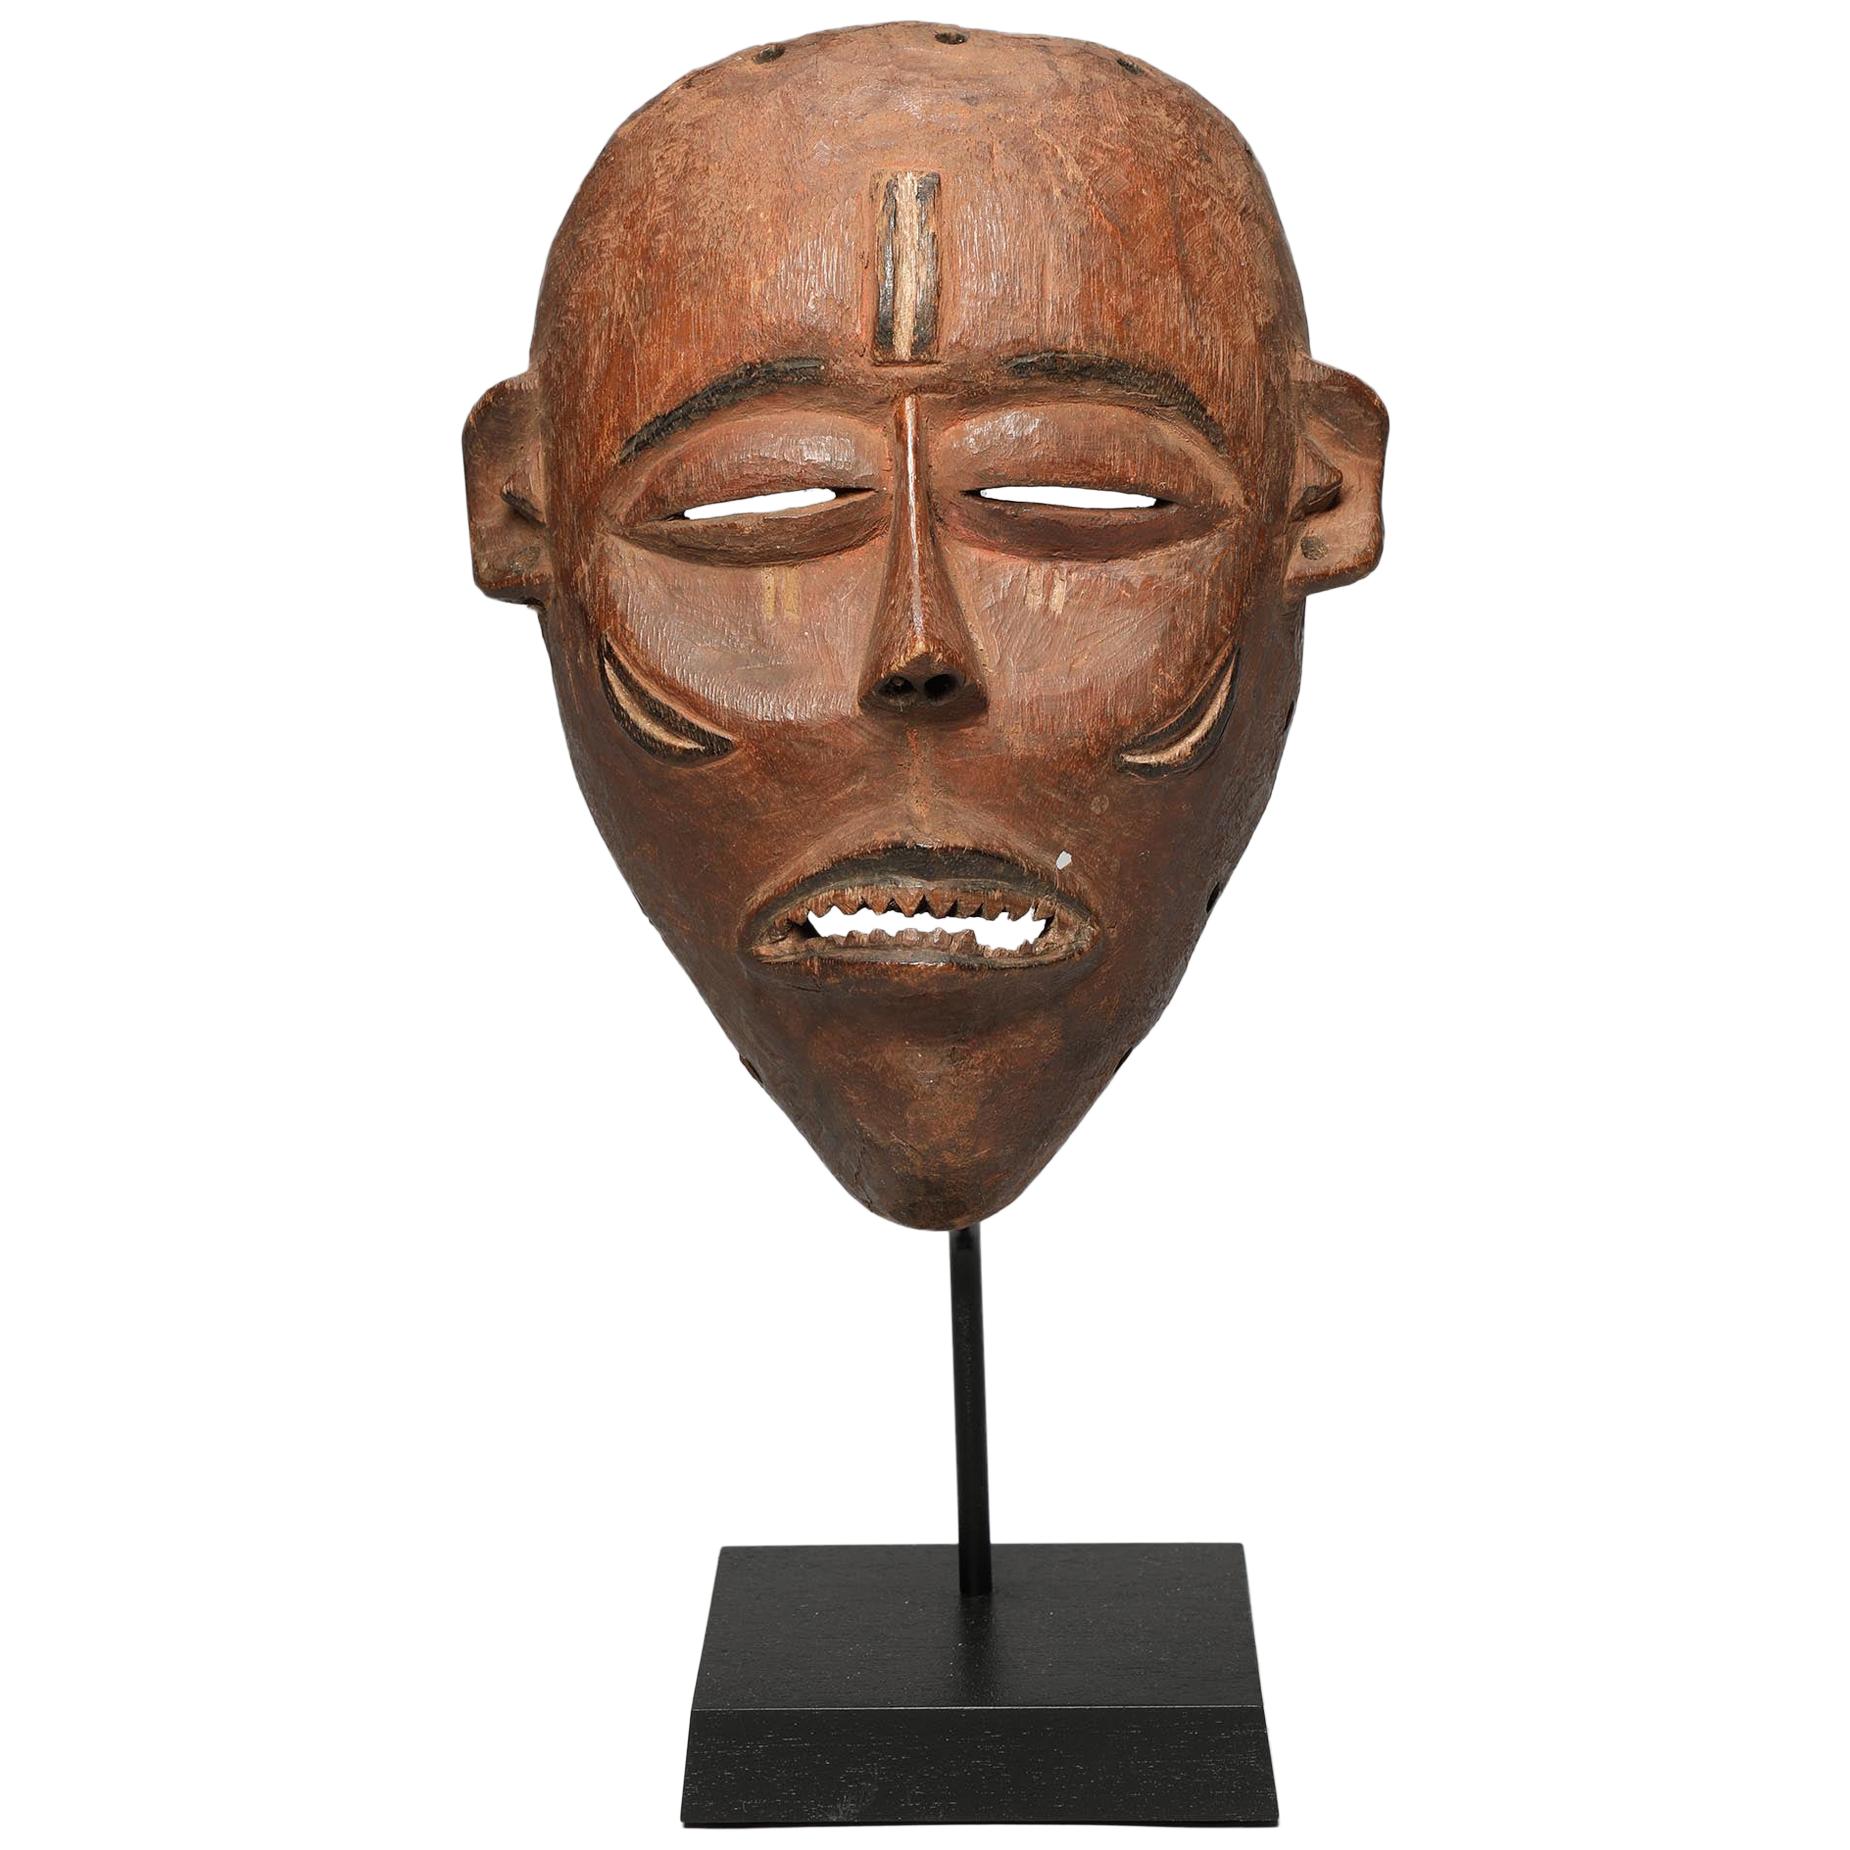 Early Hardwood Pende Dance Mask Early 20th Century DR Congo African Tribal Art